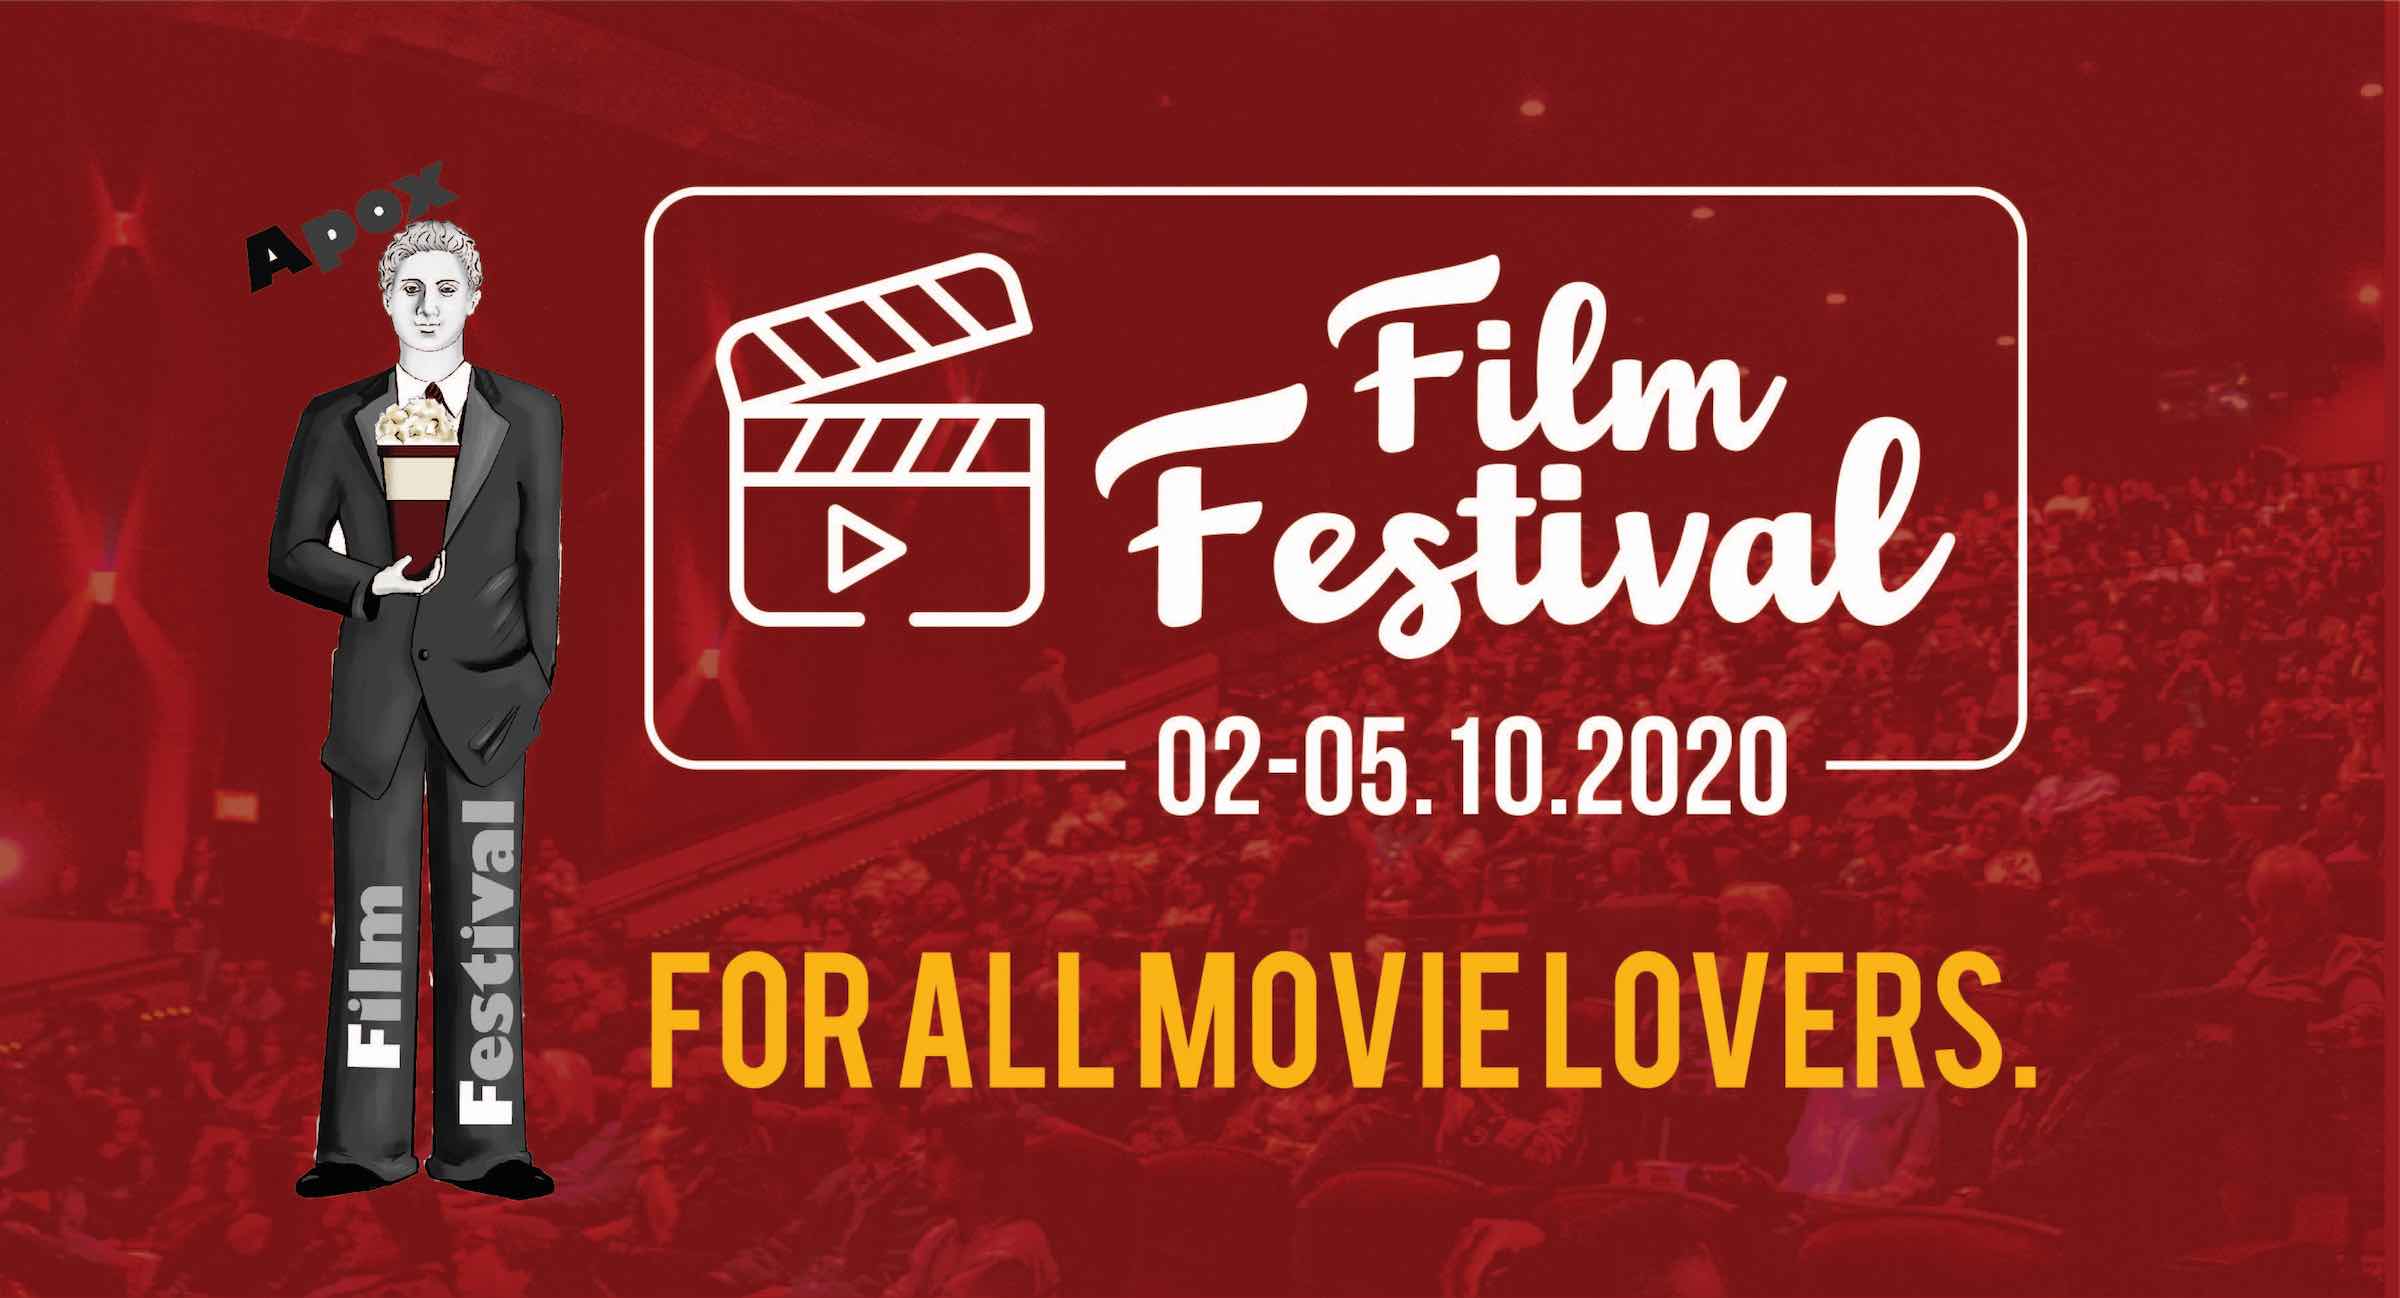 We’re highlighting some of the smaller festivals for our lovers of independent cinema, and the APOX Film Festival is the perfect place to start.